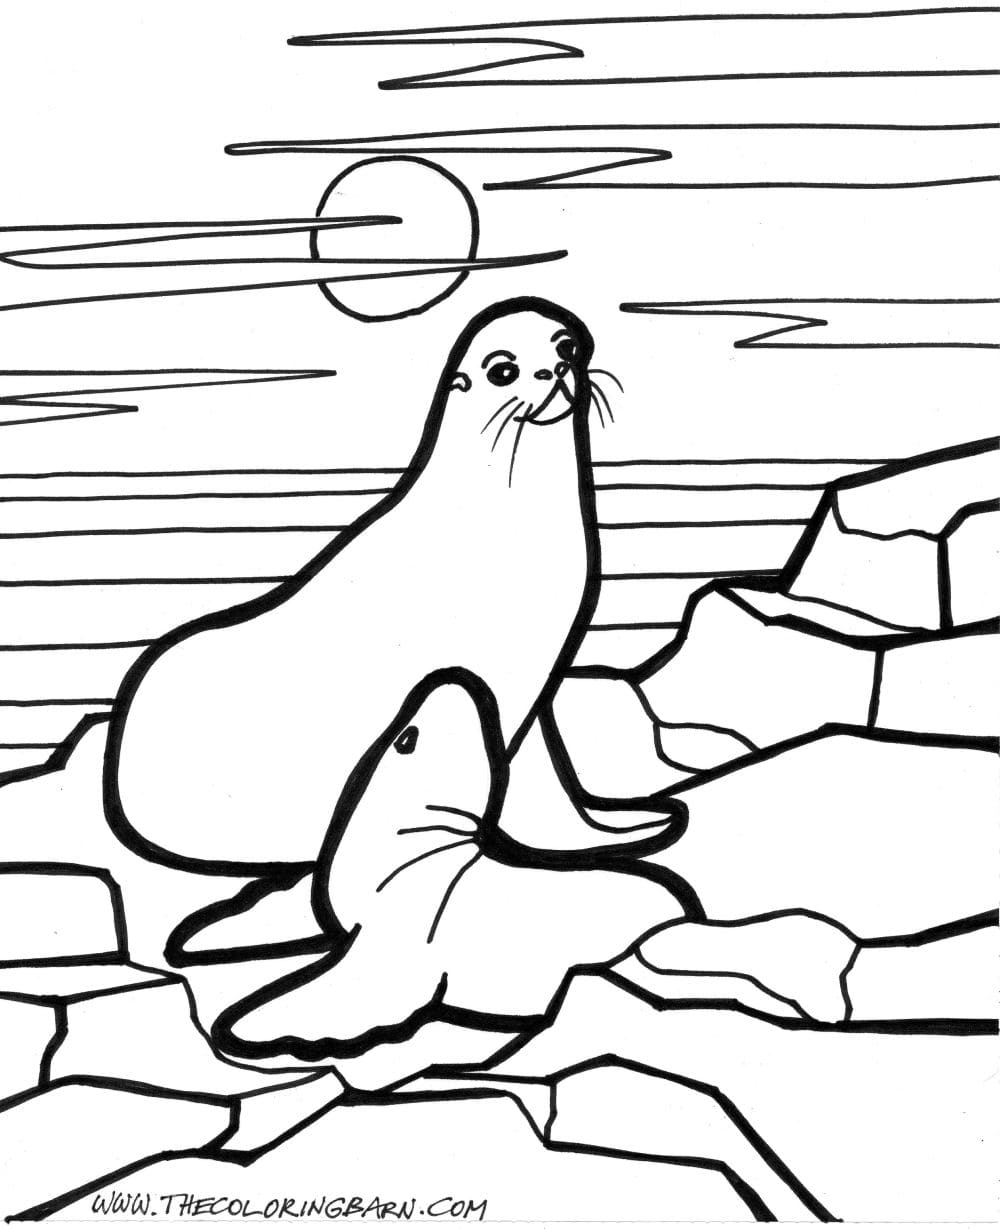 Baby Seal Image Coloring Page